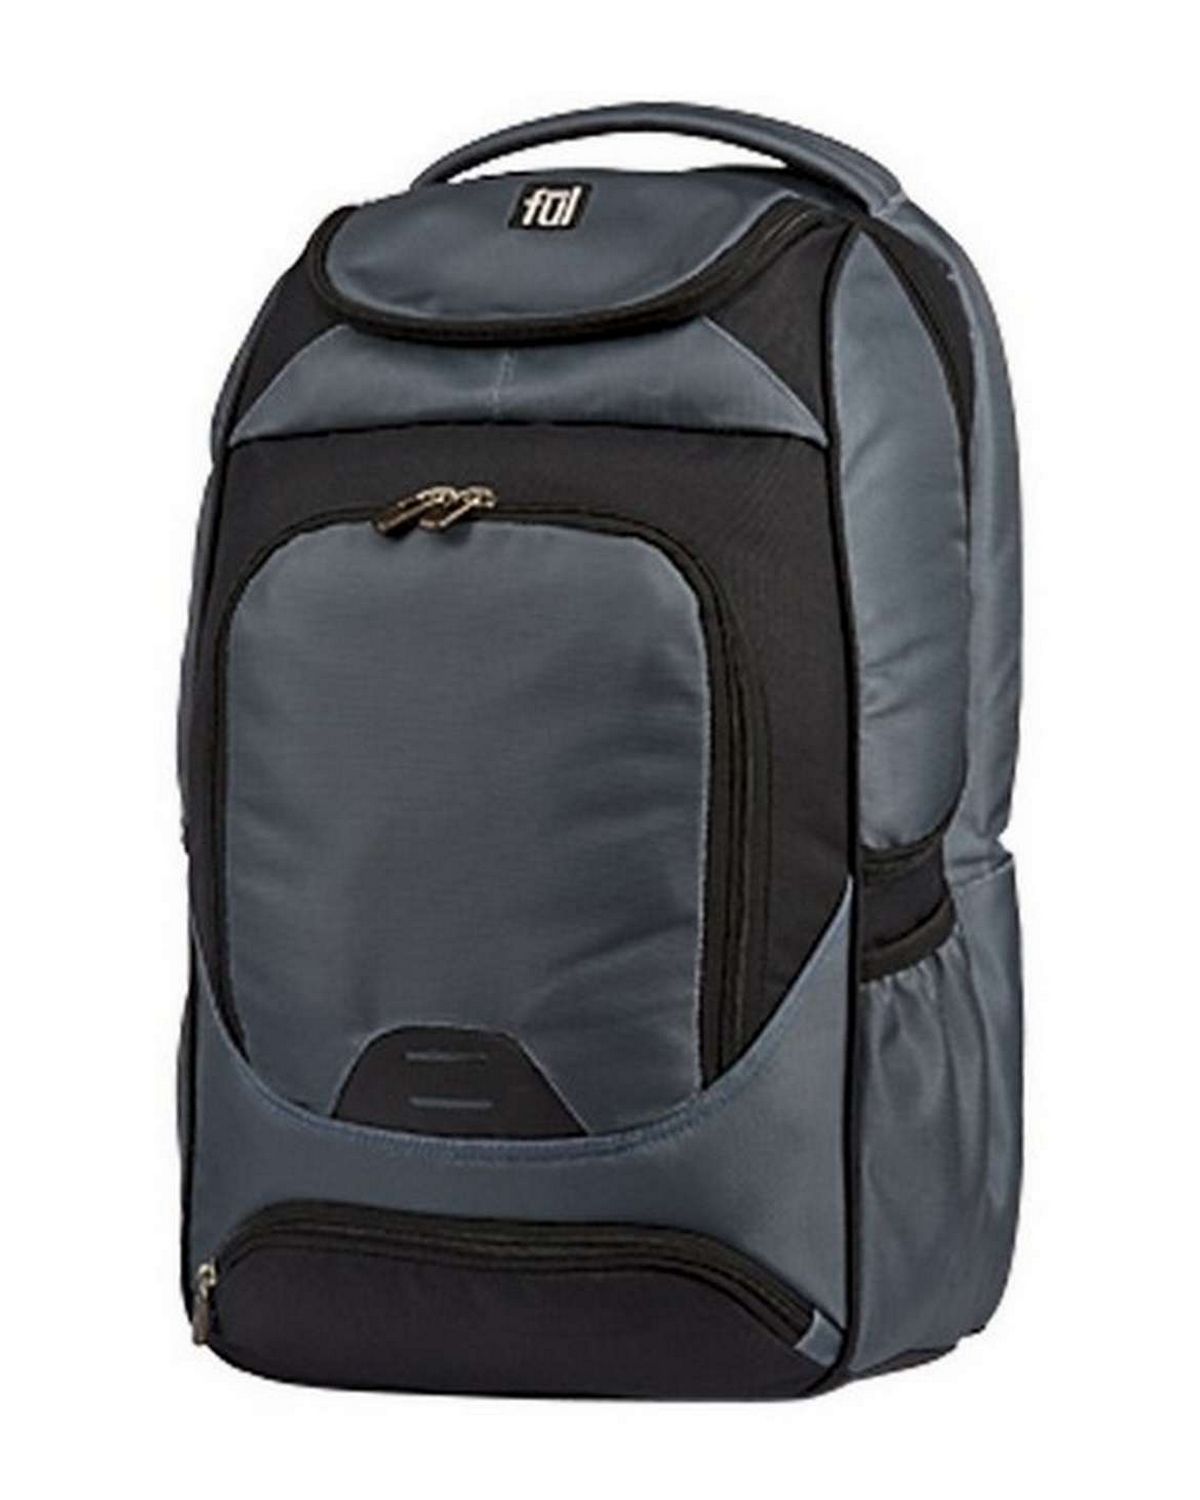 FUL BD5267 CoreTech Live Wire Backpack - Shop at ApparelnBags.com